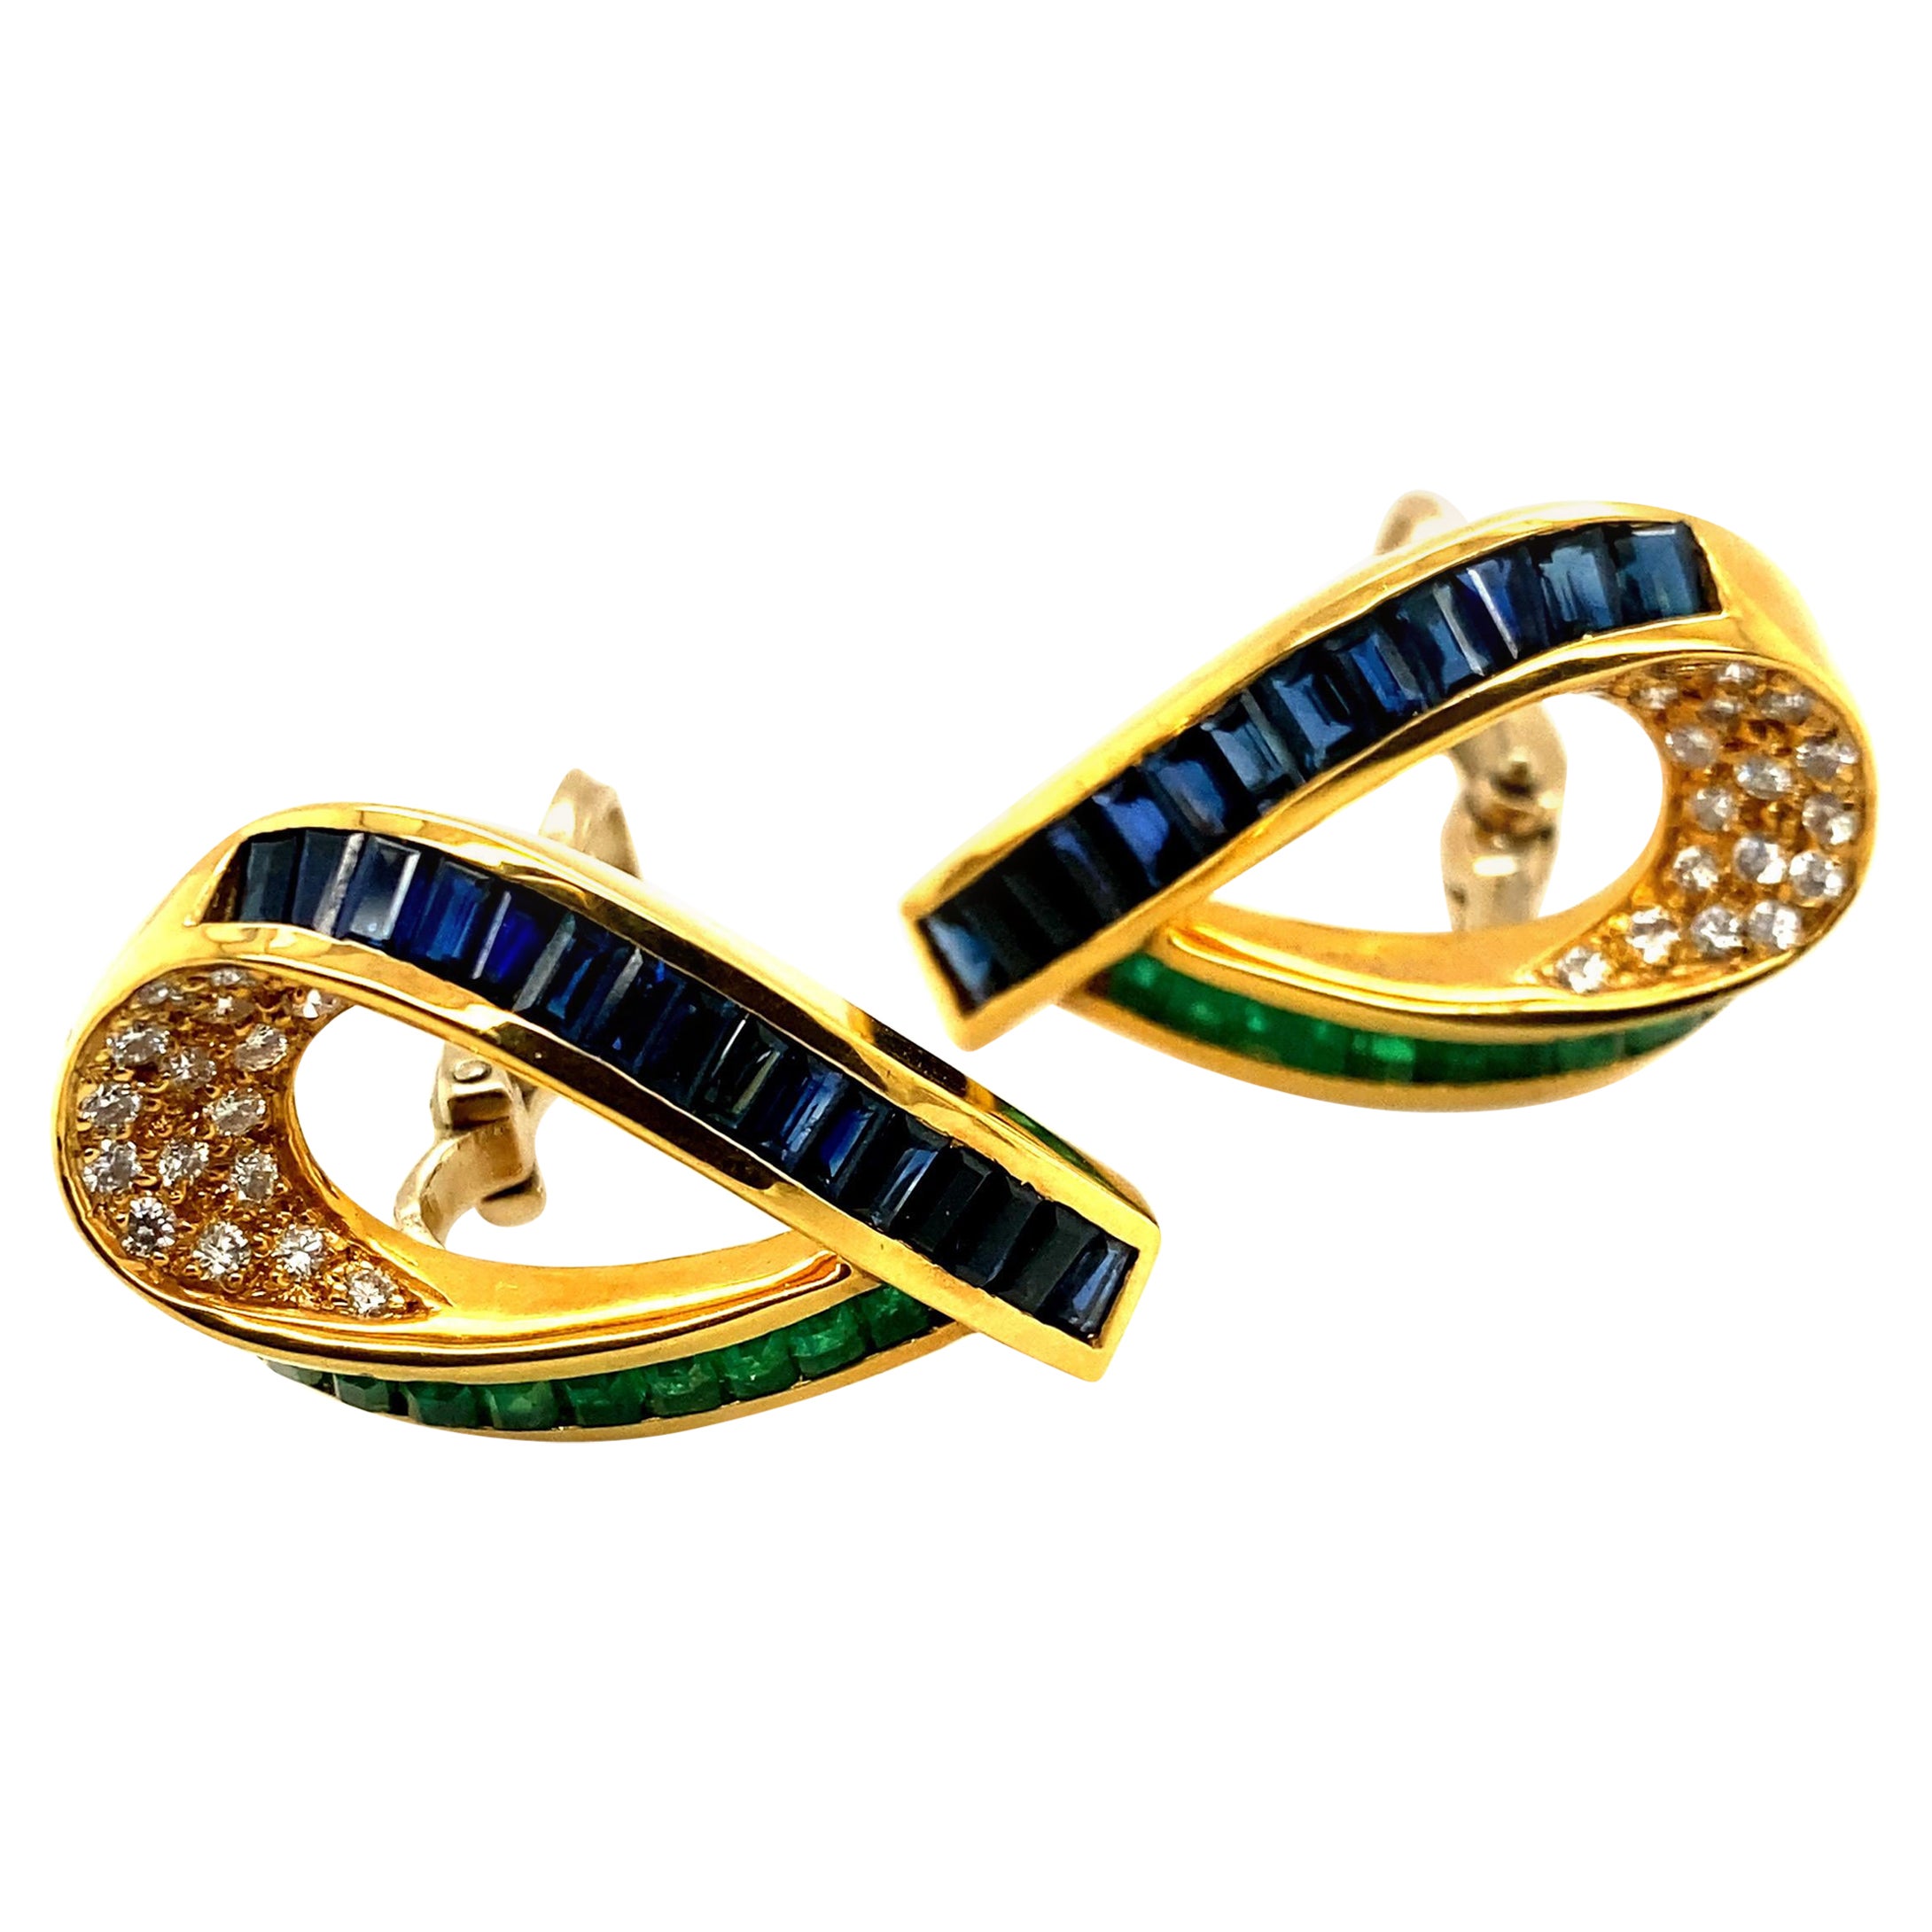 Charles Krypell 18k Yellow Gold Earrings with Blue Sapphire, Emeralds & Diamond